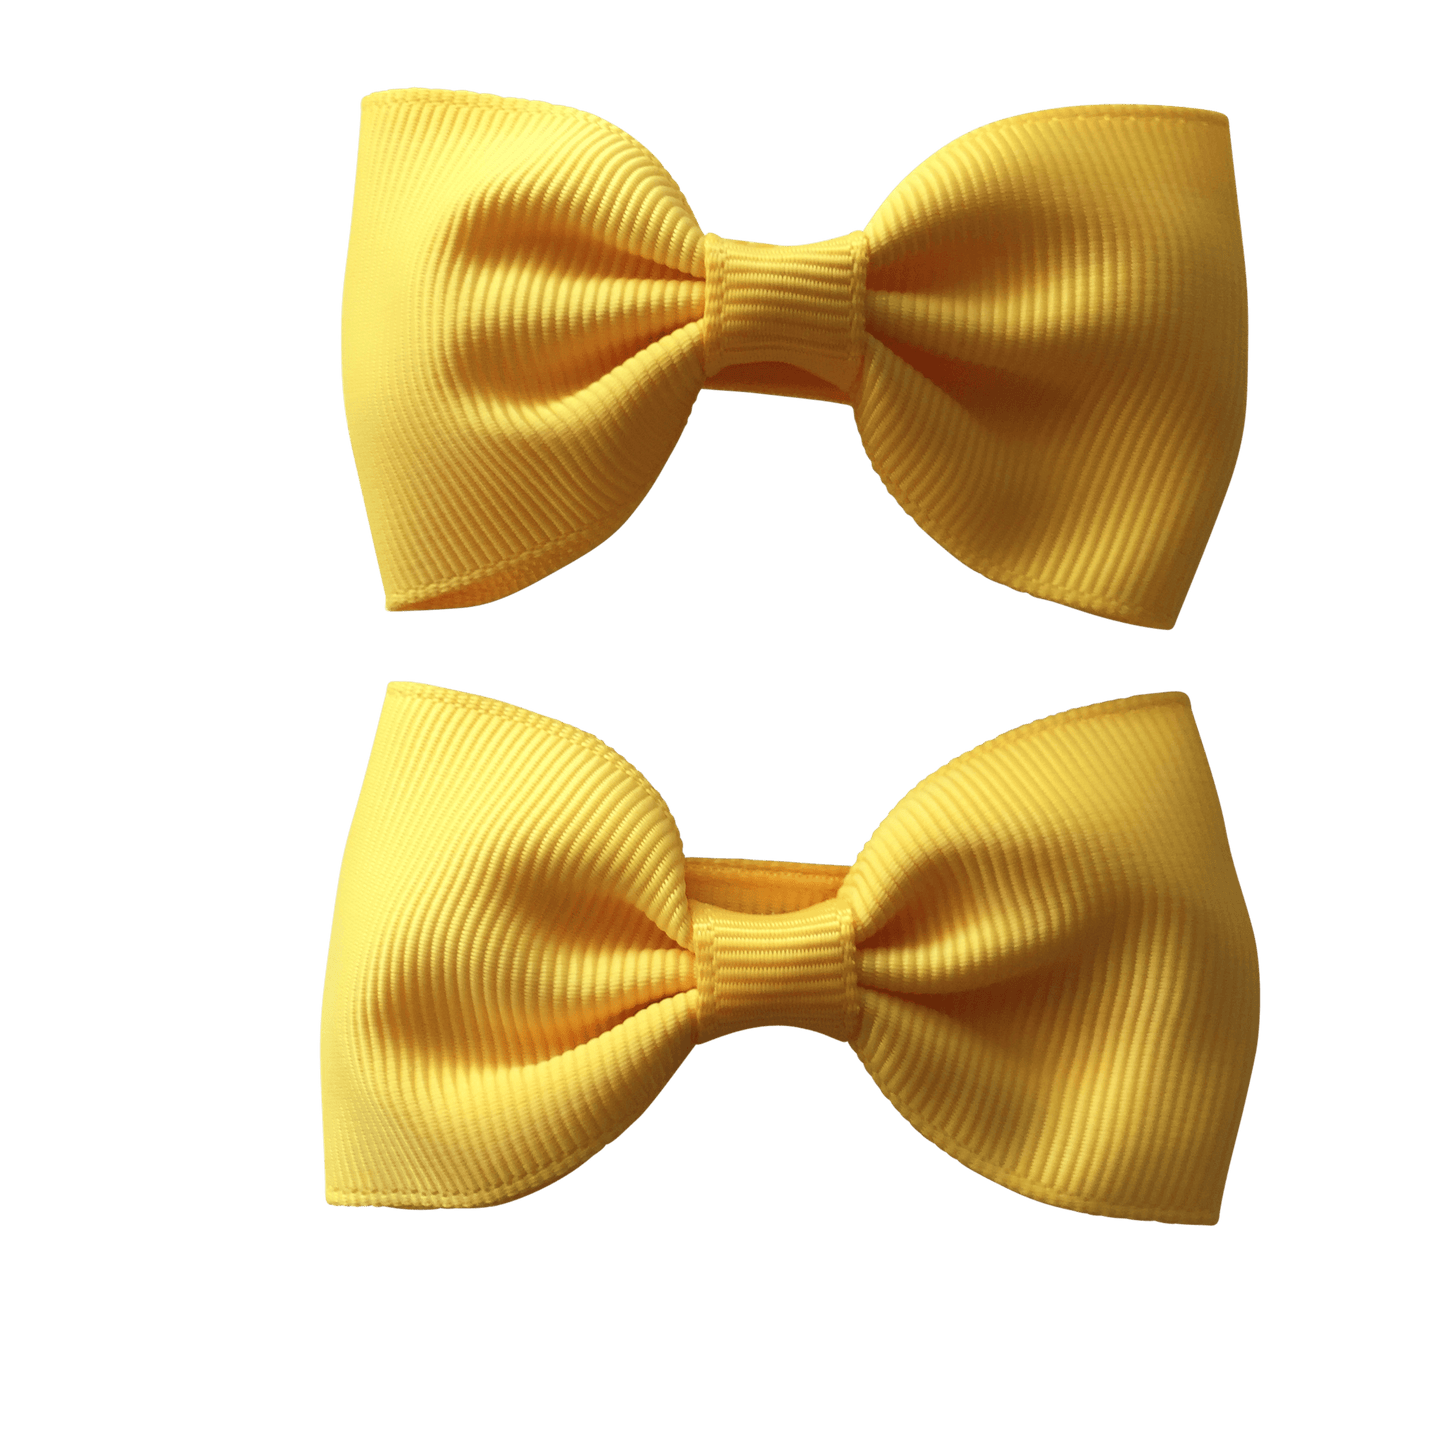 Yellow Hair Accessories - Ponytails and Fairytales